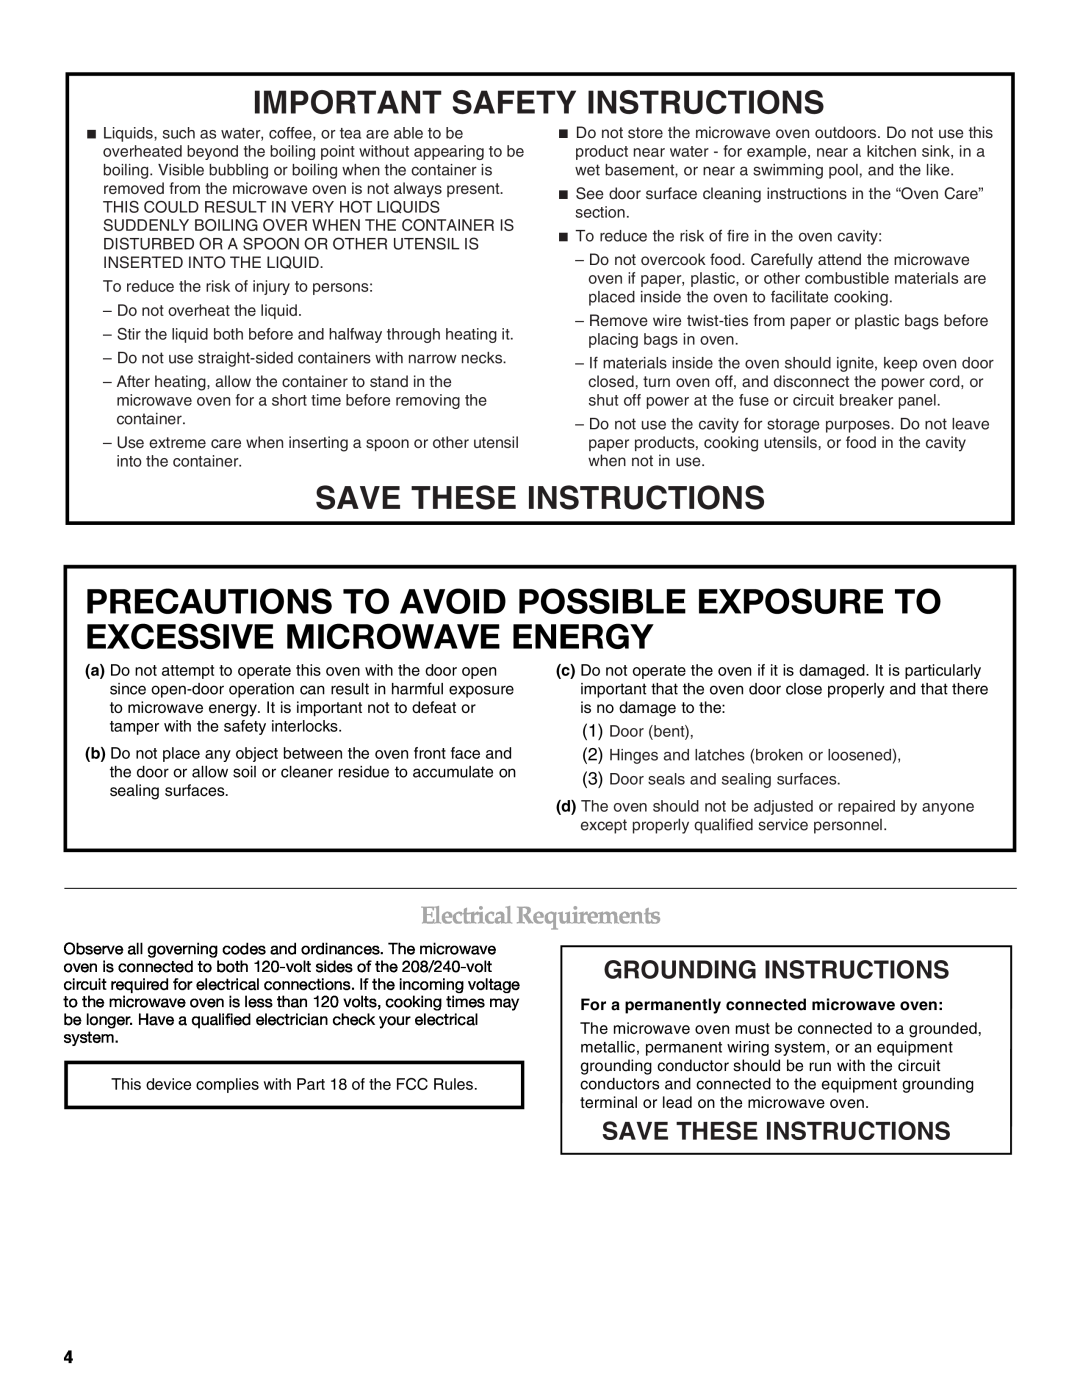 KitchenAid KEHU309 ElectricalRequirements, Grounding Instructions, Save These Instructions, Important Safety Instructions 